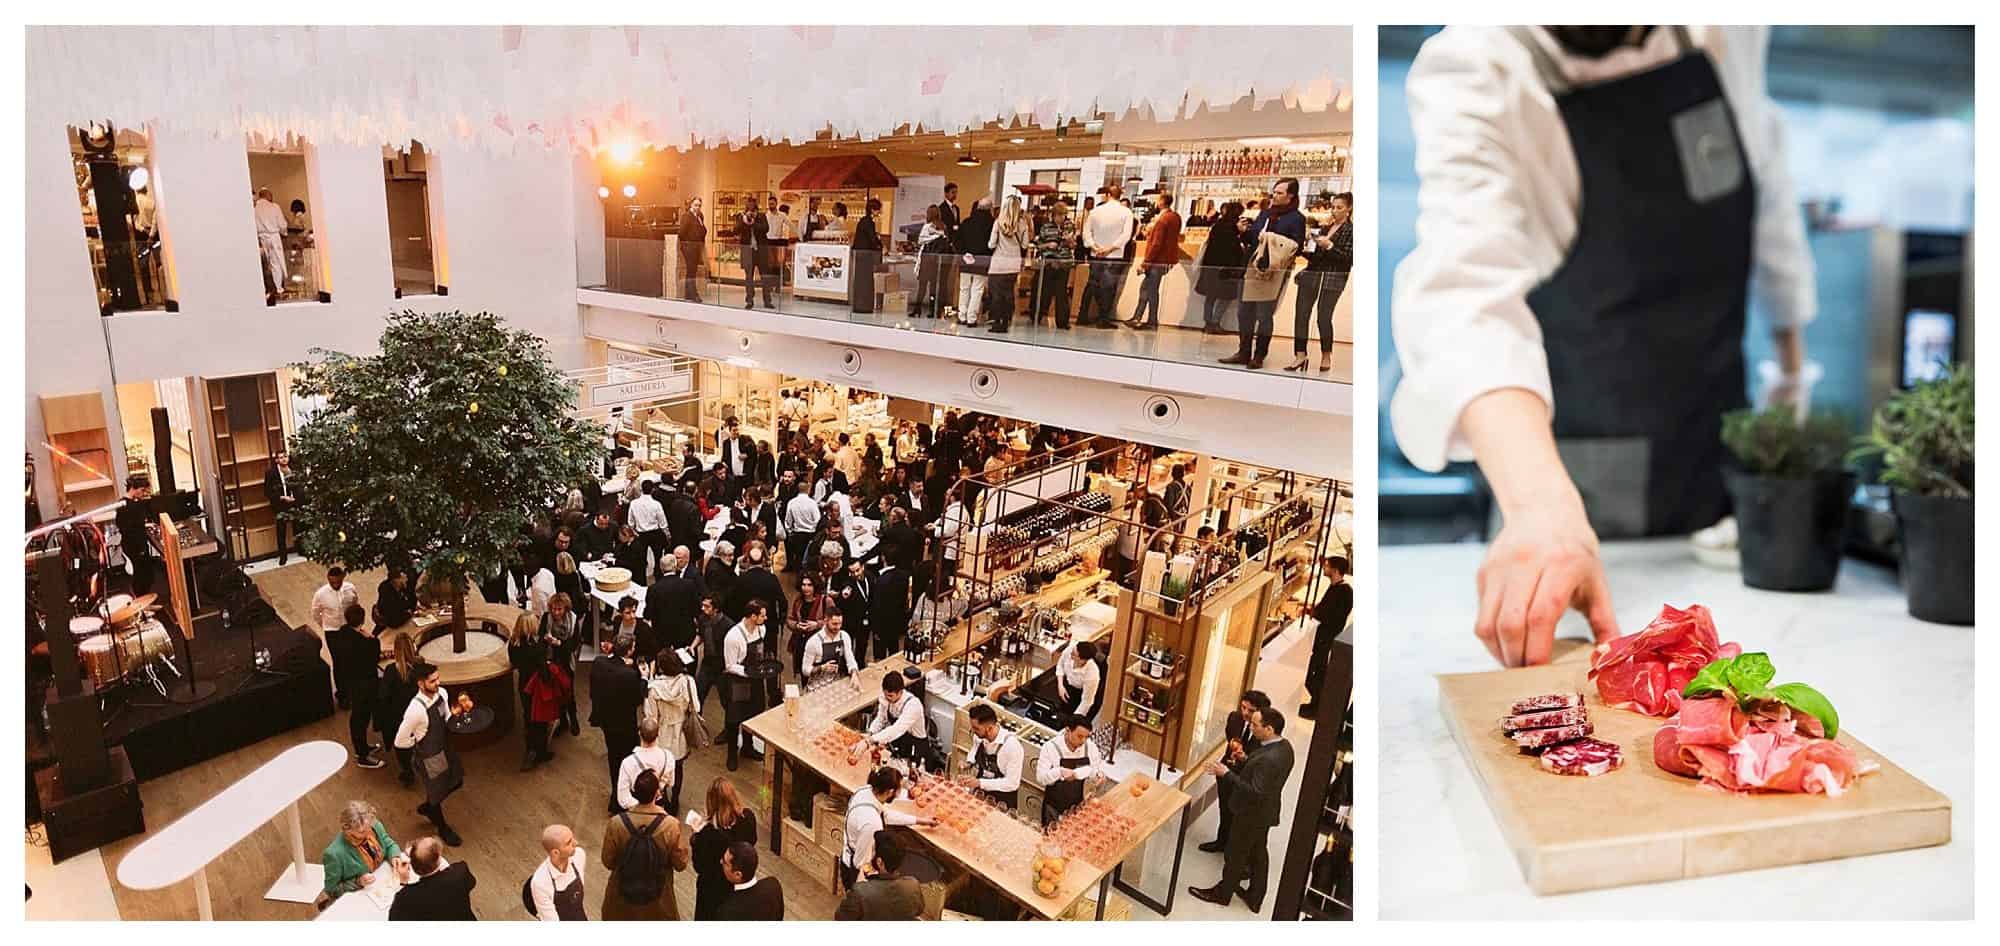 Inside Eataly food court in the Marais in Paris, with people sitting at high tables enjoying the Italian food served here (left). A chef serving cold cuts on a wooden board (right).